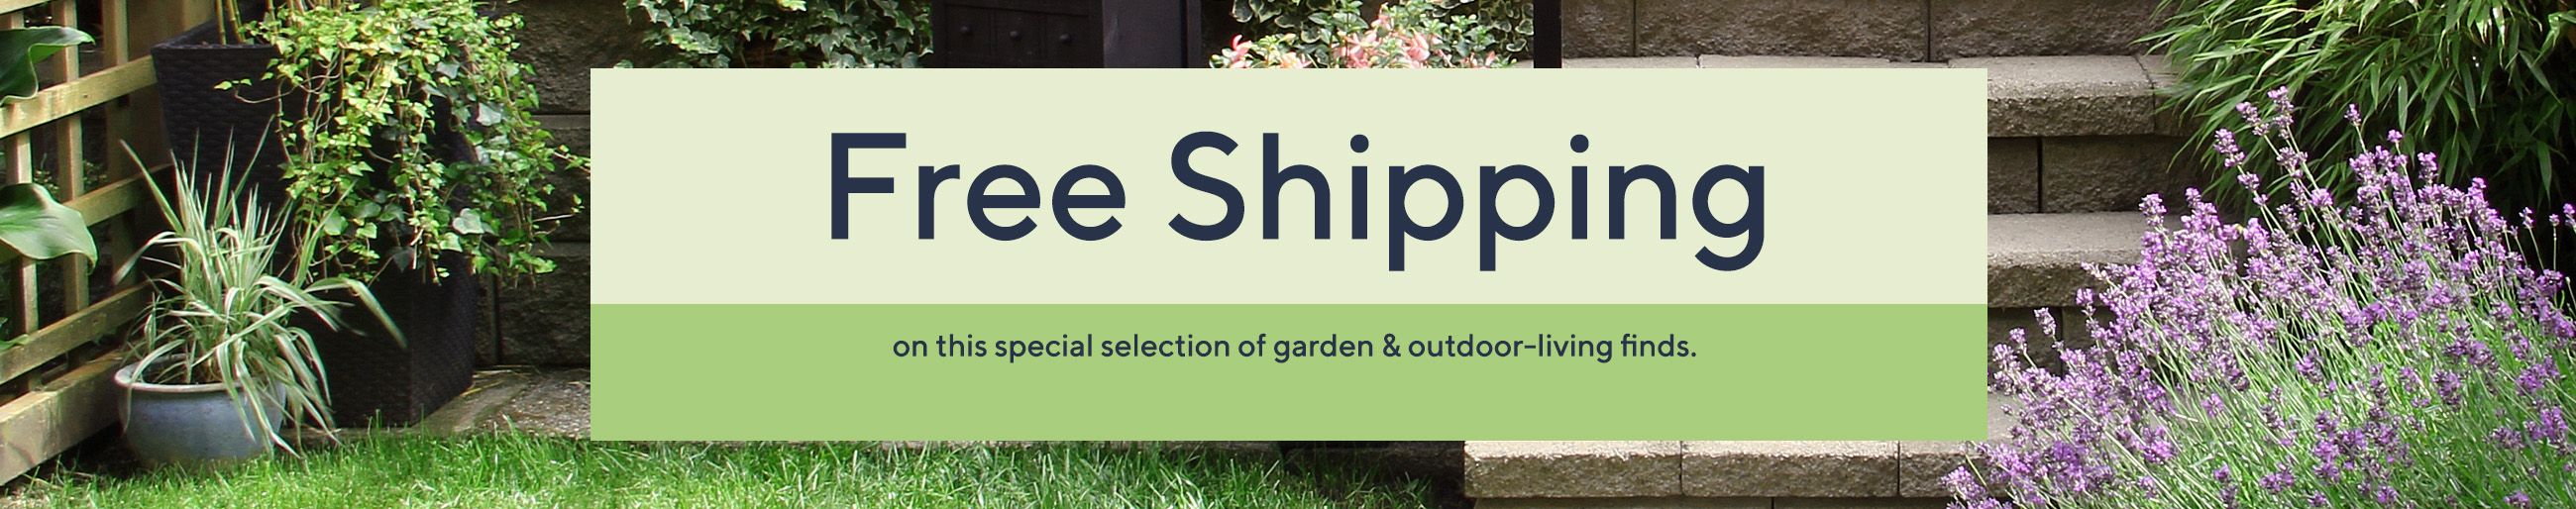 Free Shipping on this special selection of garden & outdoor-living finds.